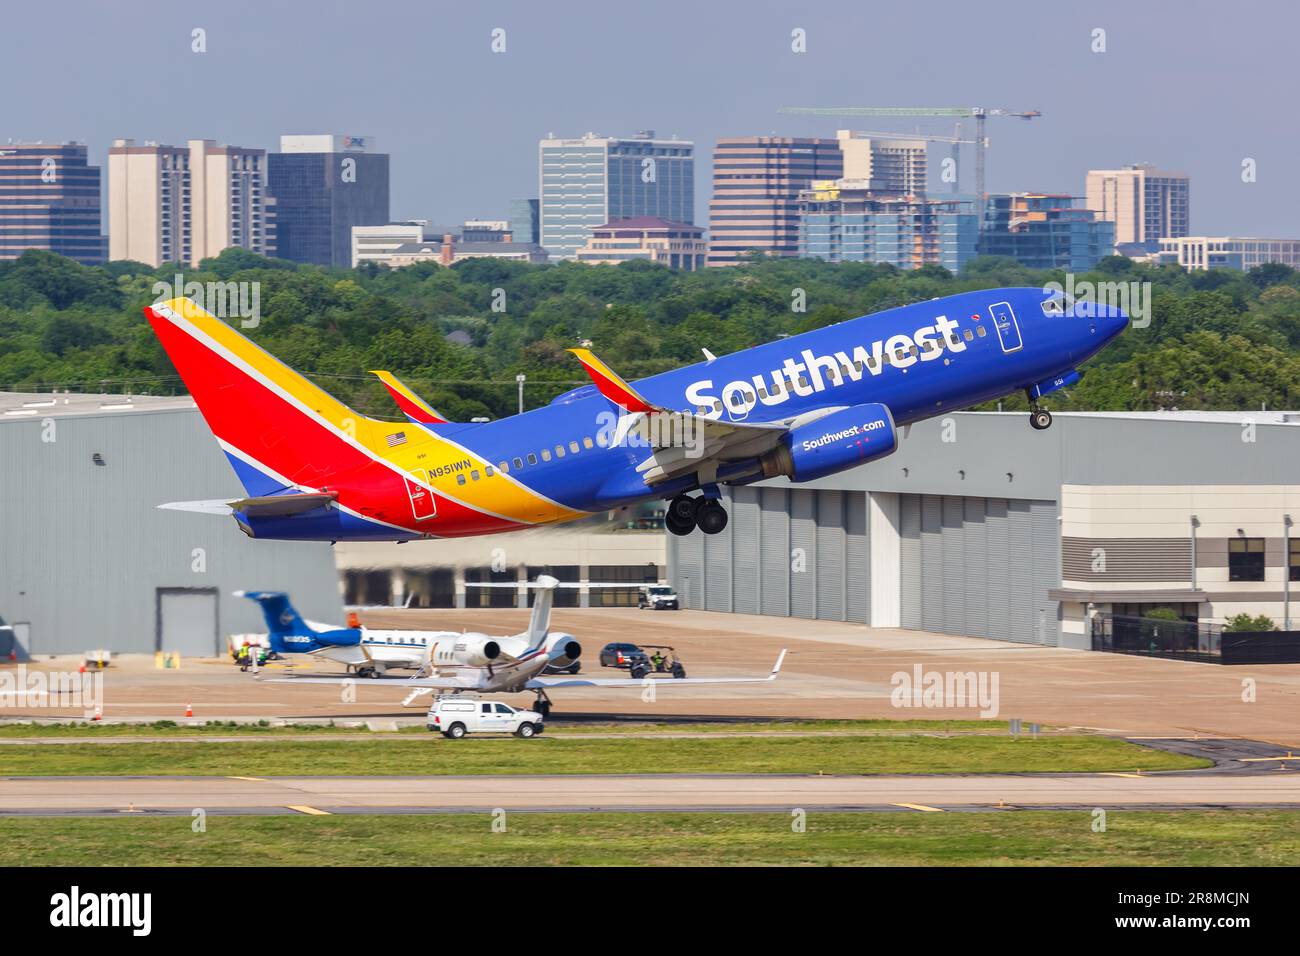 Dallas, United States - May 7, 2023: Southwest Boeing 737-700 airplane at Dallas Love Field Airport (DAL) in the United States. Stock Photo